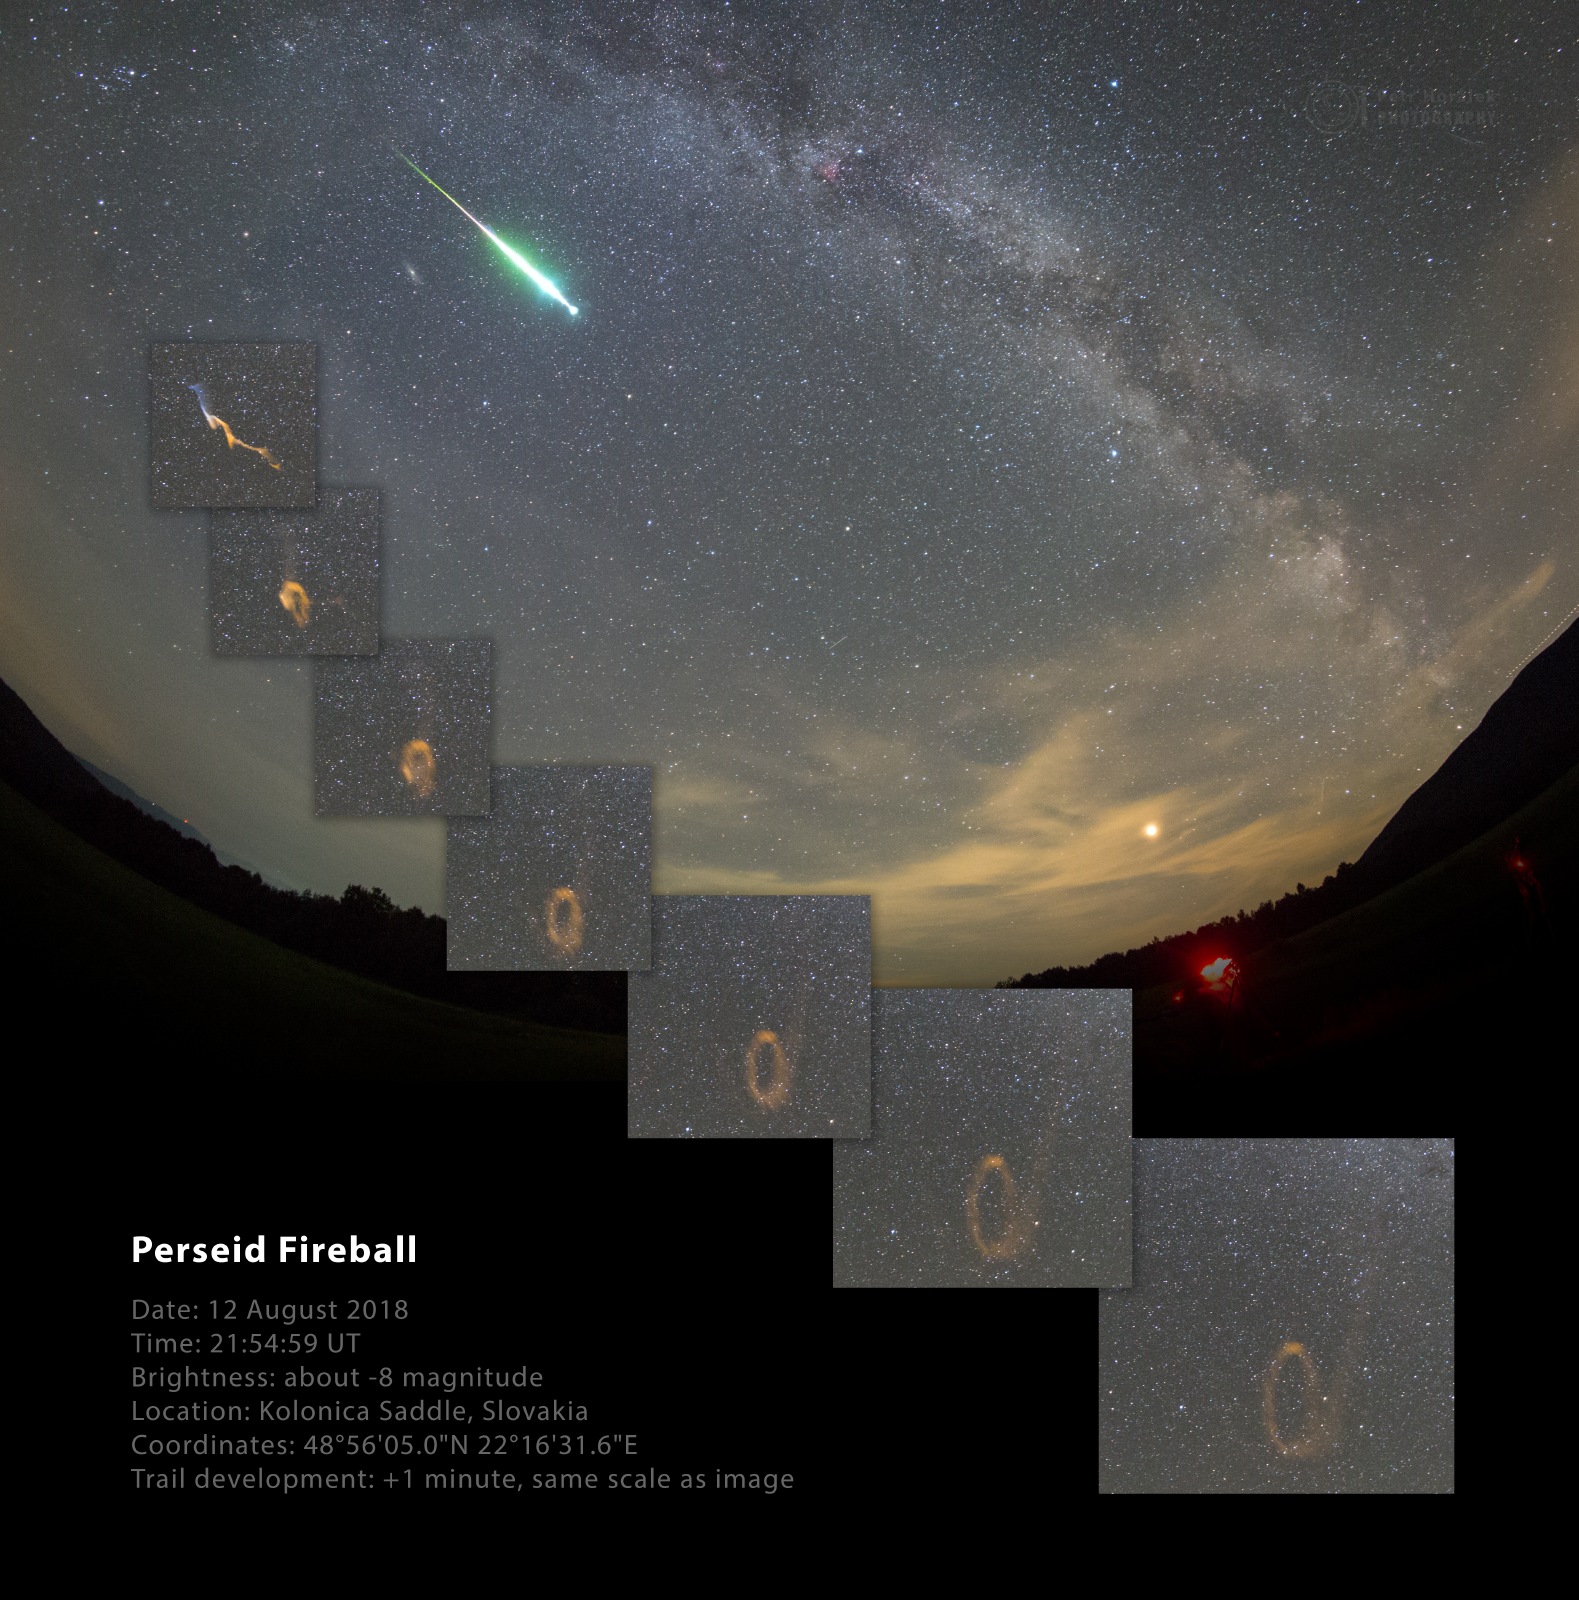 Perseid Fireball and Persistent Train